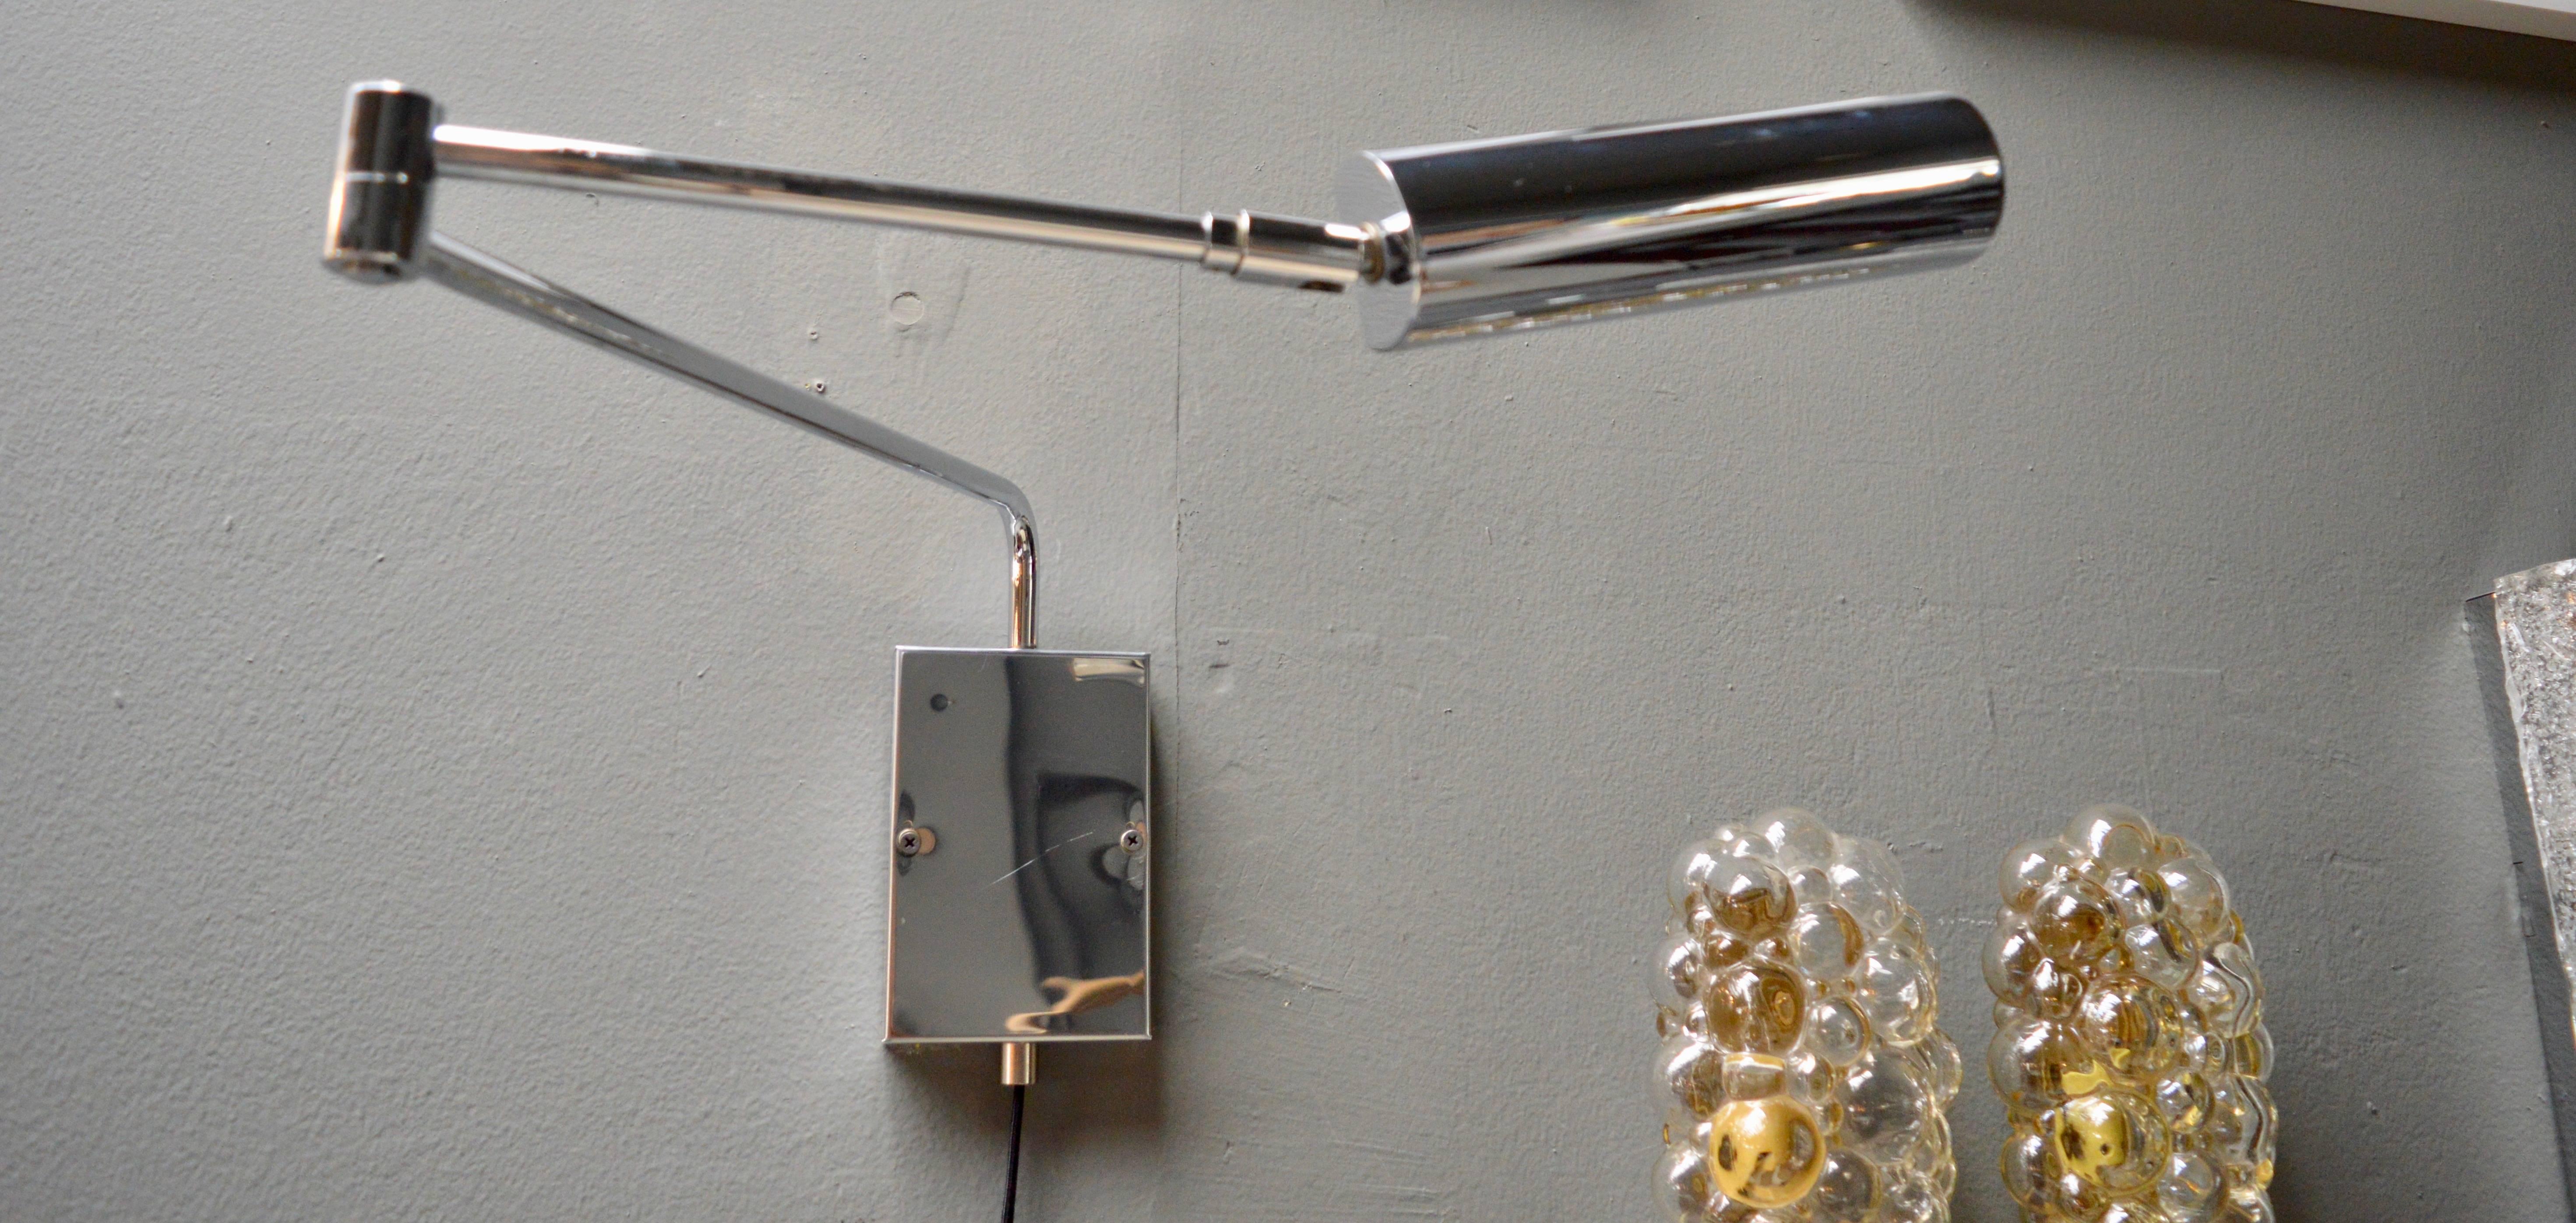 Fantastic wall sconce by Koch and Lowy. Chrome lamp with all chrome hardware and wall plate. Lamp articulates in all directions and has a swing arm that can sit flush, folded against the wall or extend three feet out. Perfect bedside, desk side or